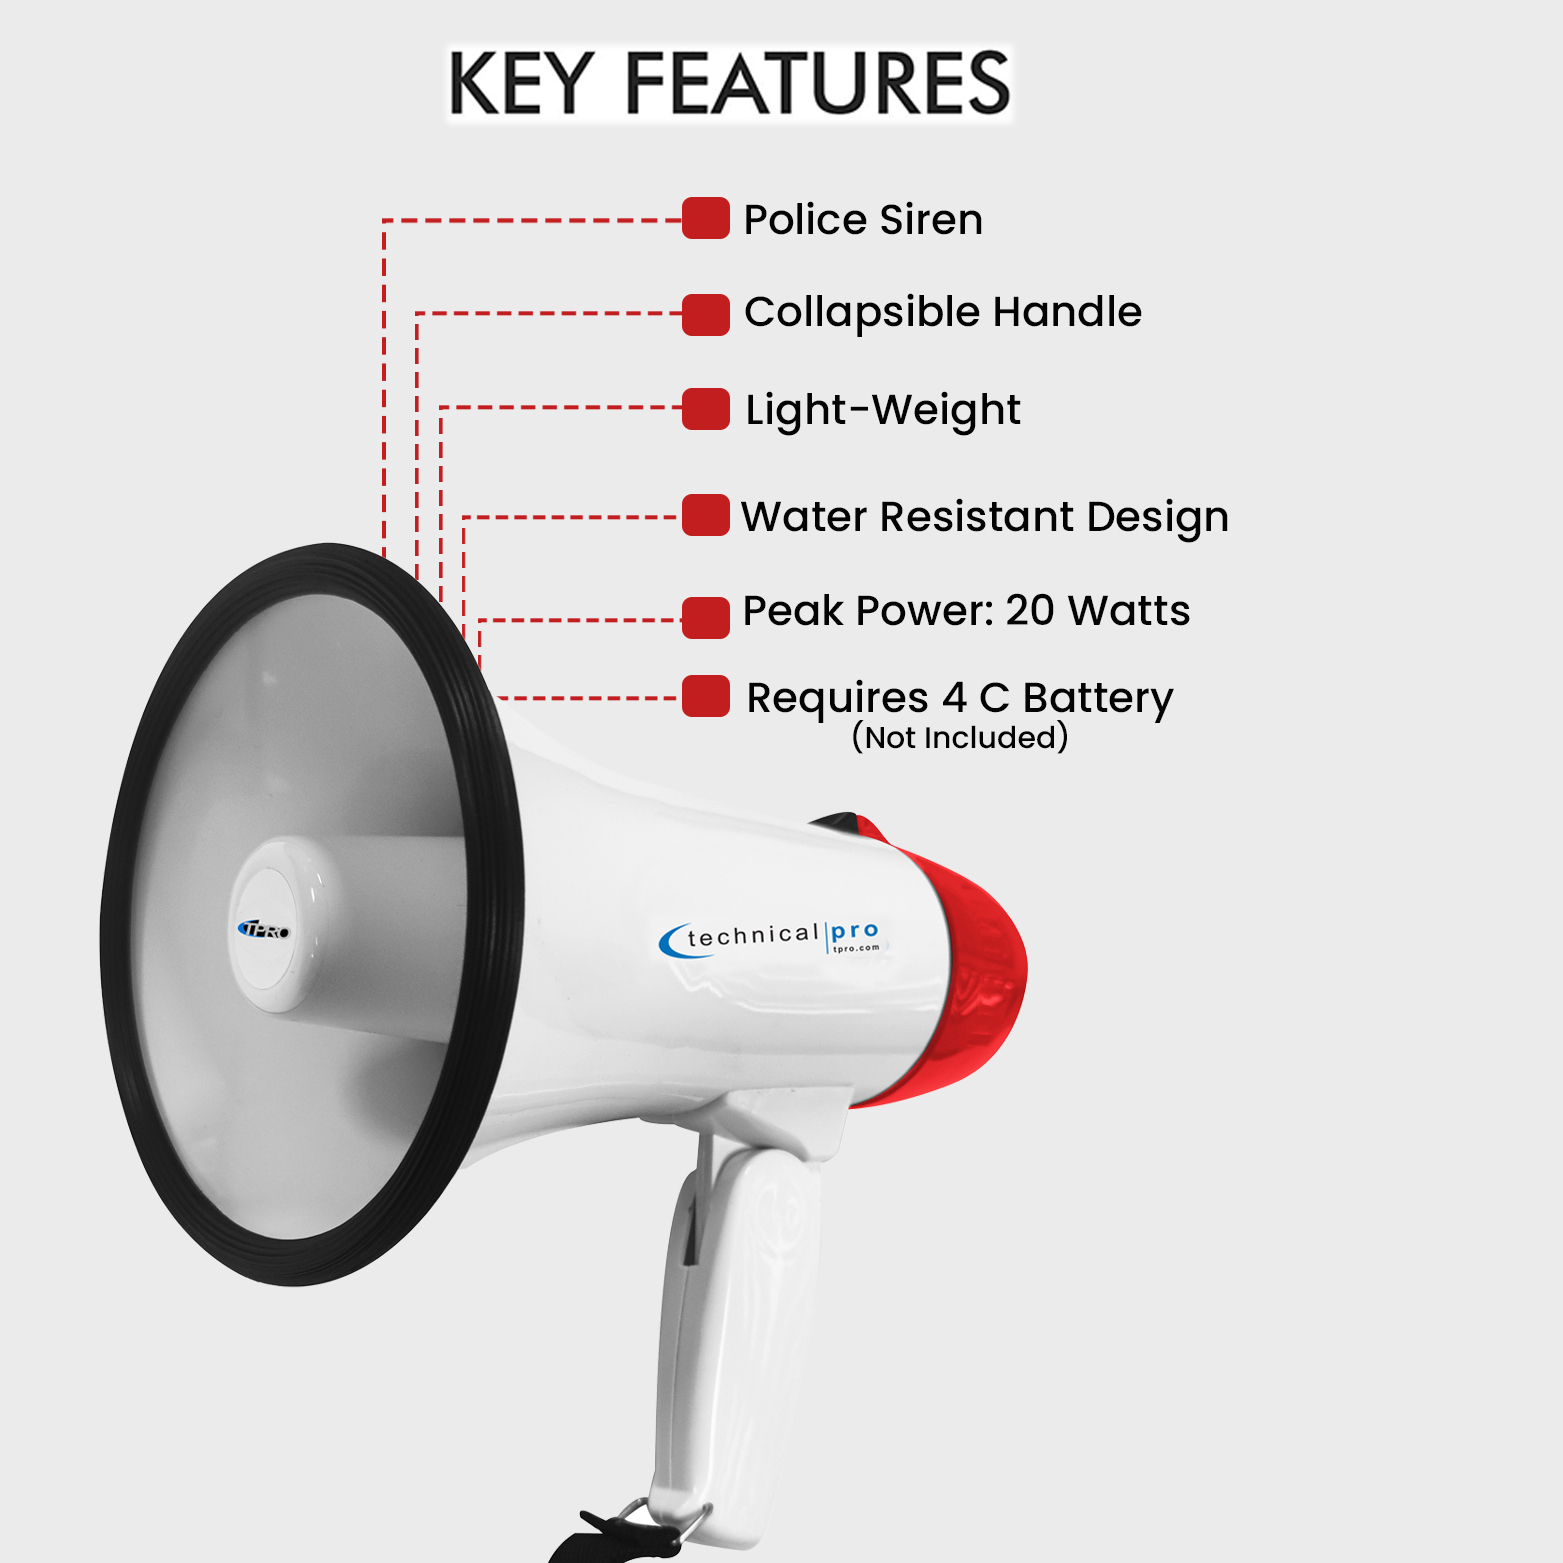 Technical Pro 40 Watts Lightweight Portable 300M Range White And Red Megaphone Bullhorn With Strap, Siren, And Volume Control